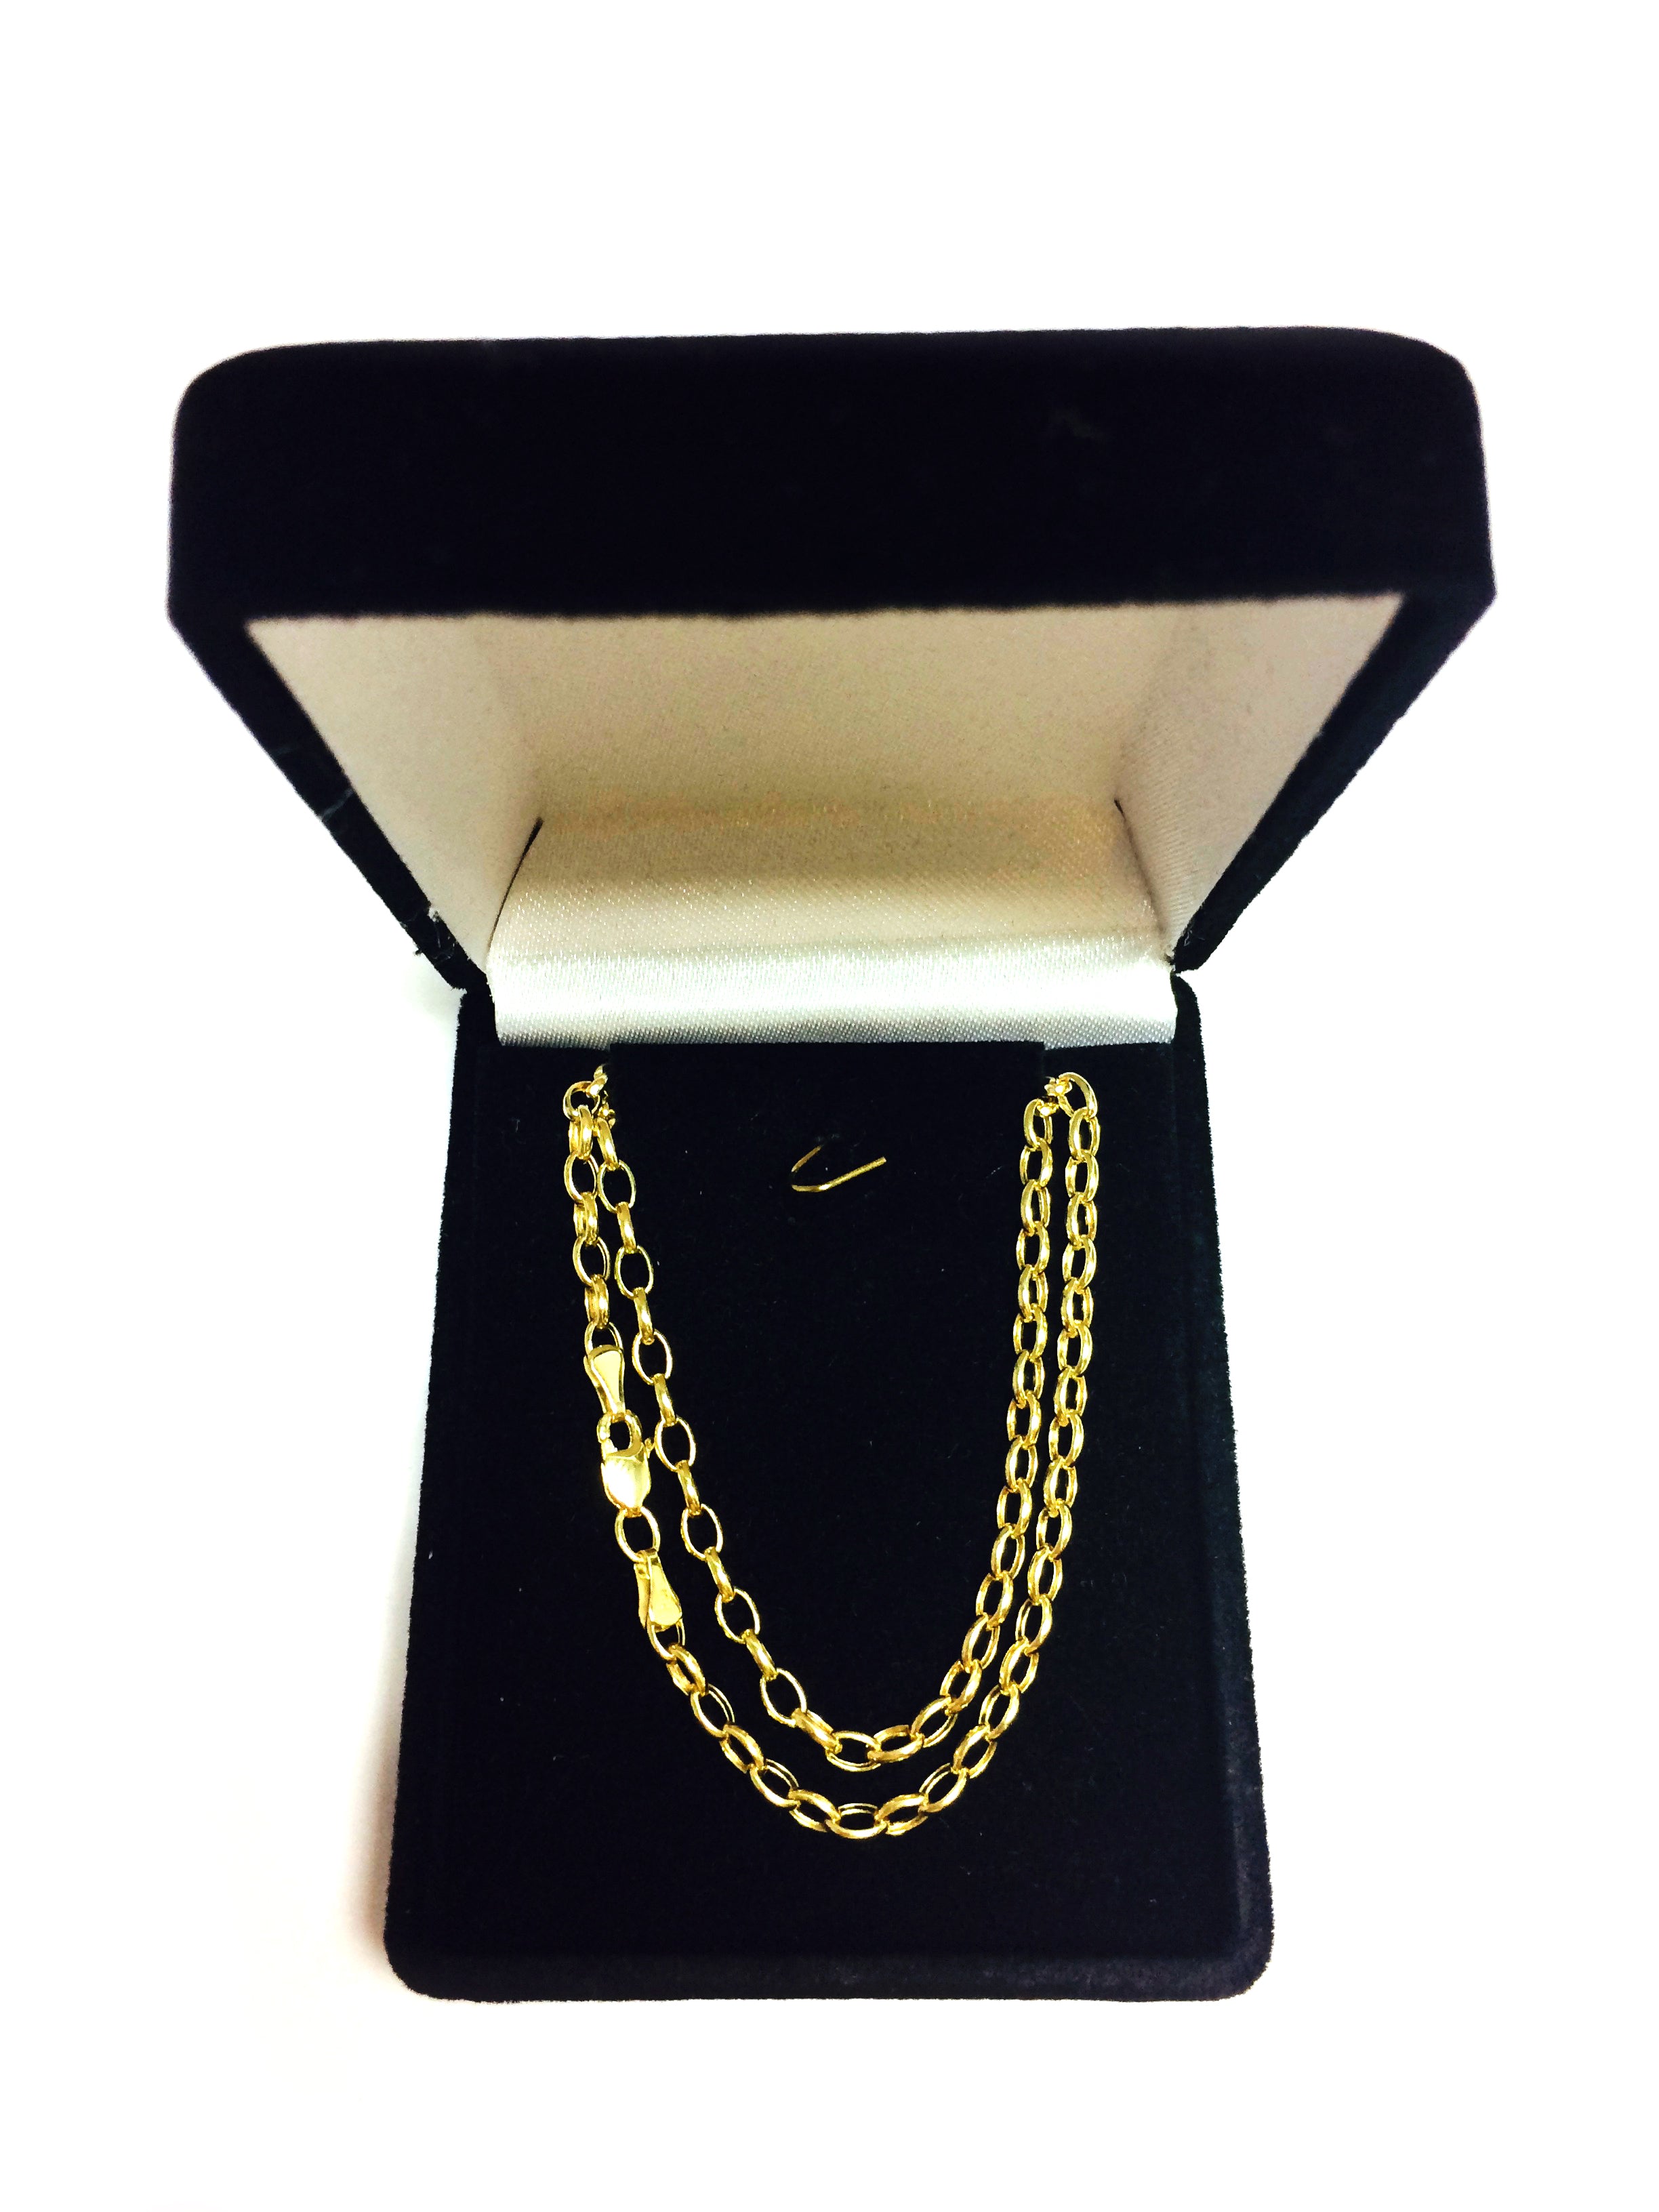 14k Yellow Gold Oval Rolo Link Chain Necklace, 3.2mm, 18" fine designer jewelry for men and women